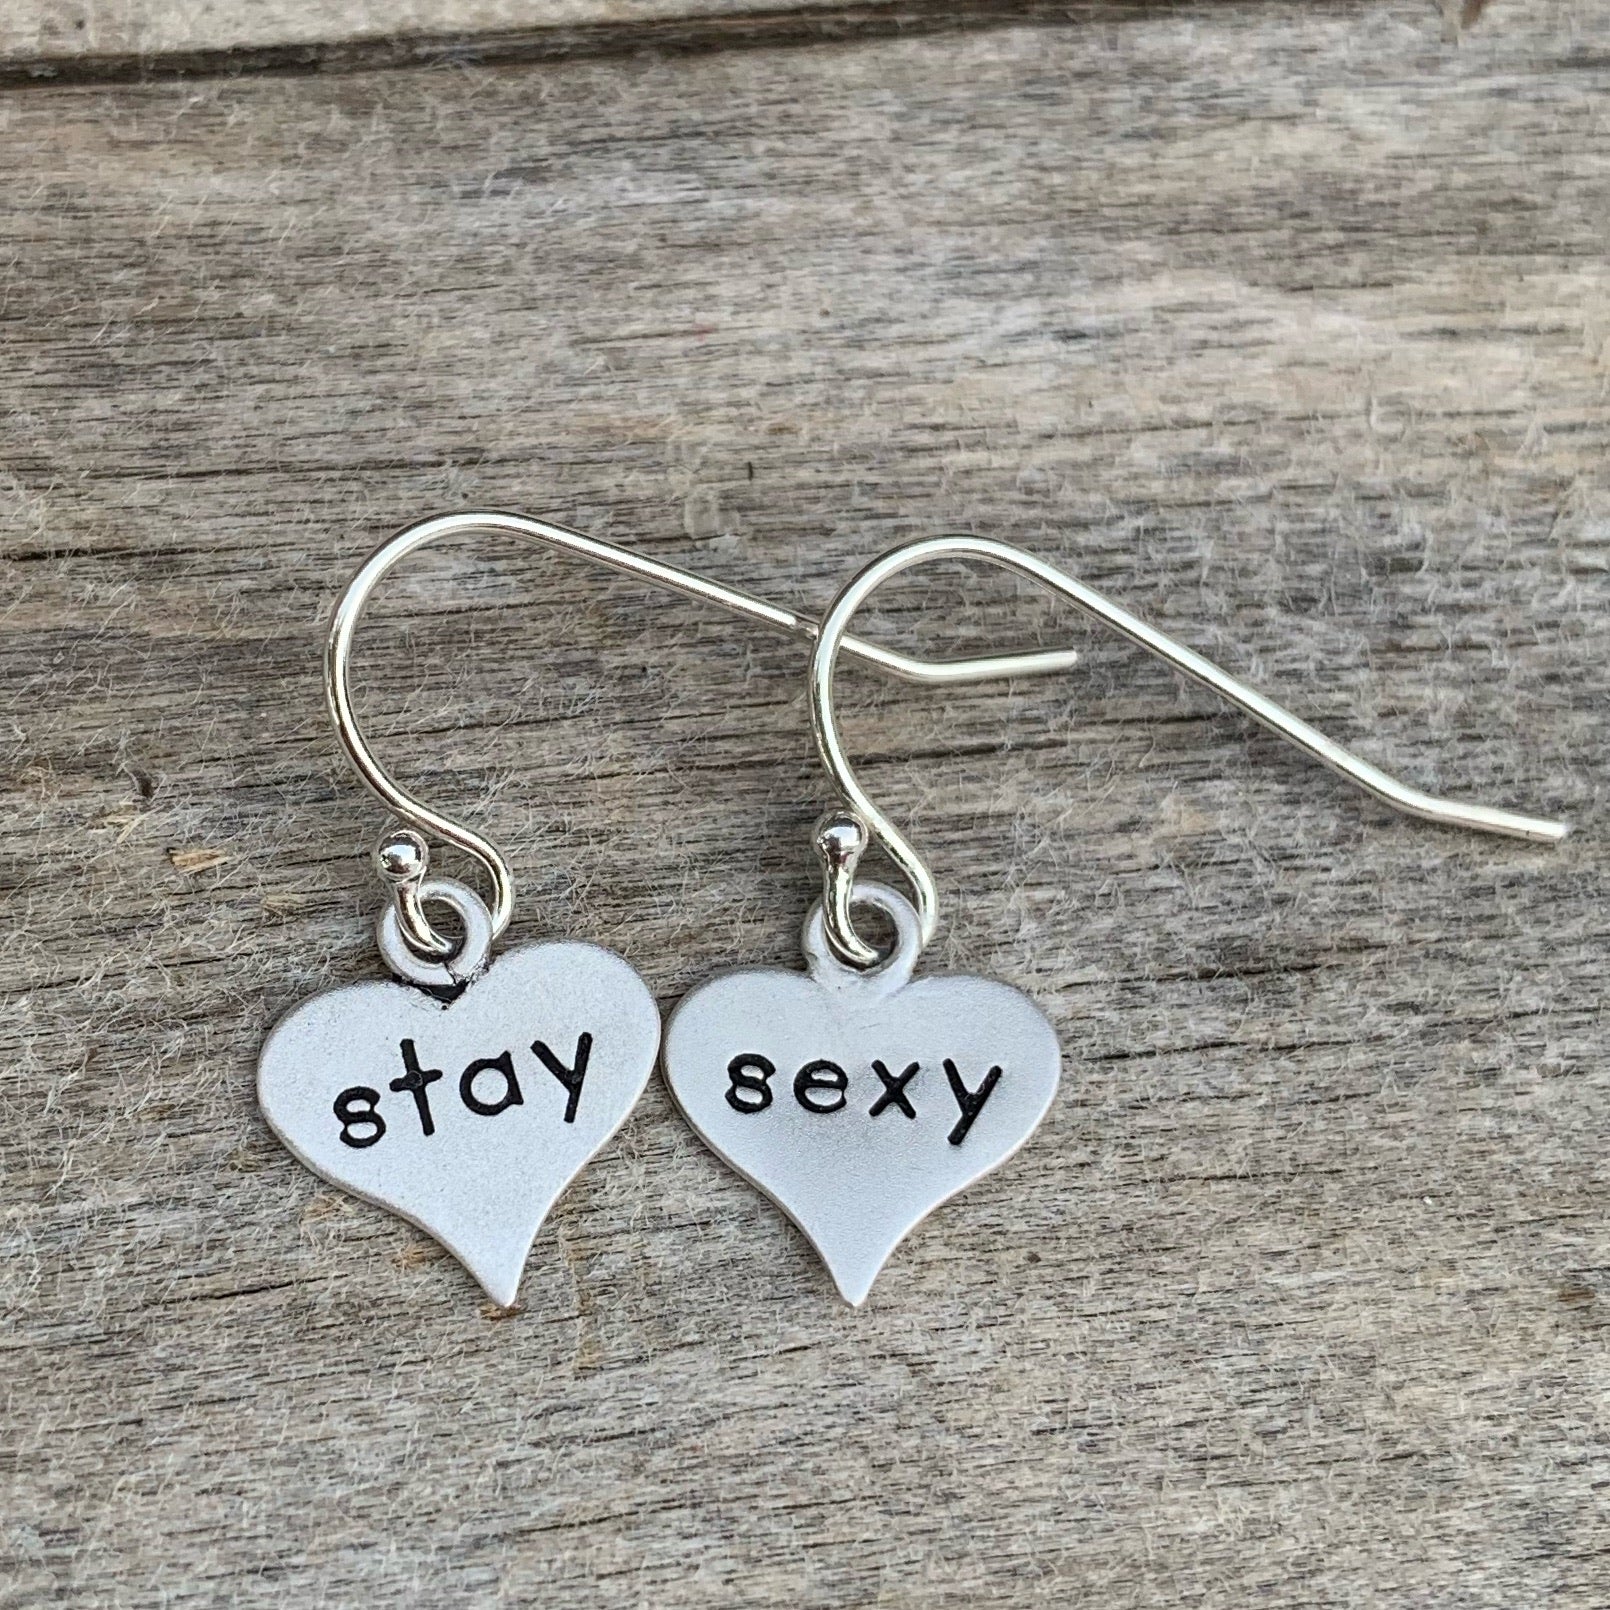 Pair of sterling silver earrings - heart shaped - “stay sexy”